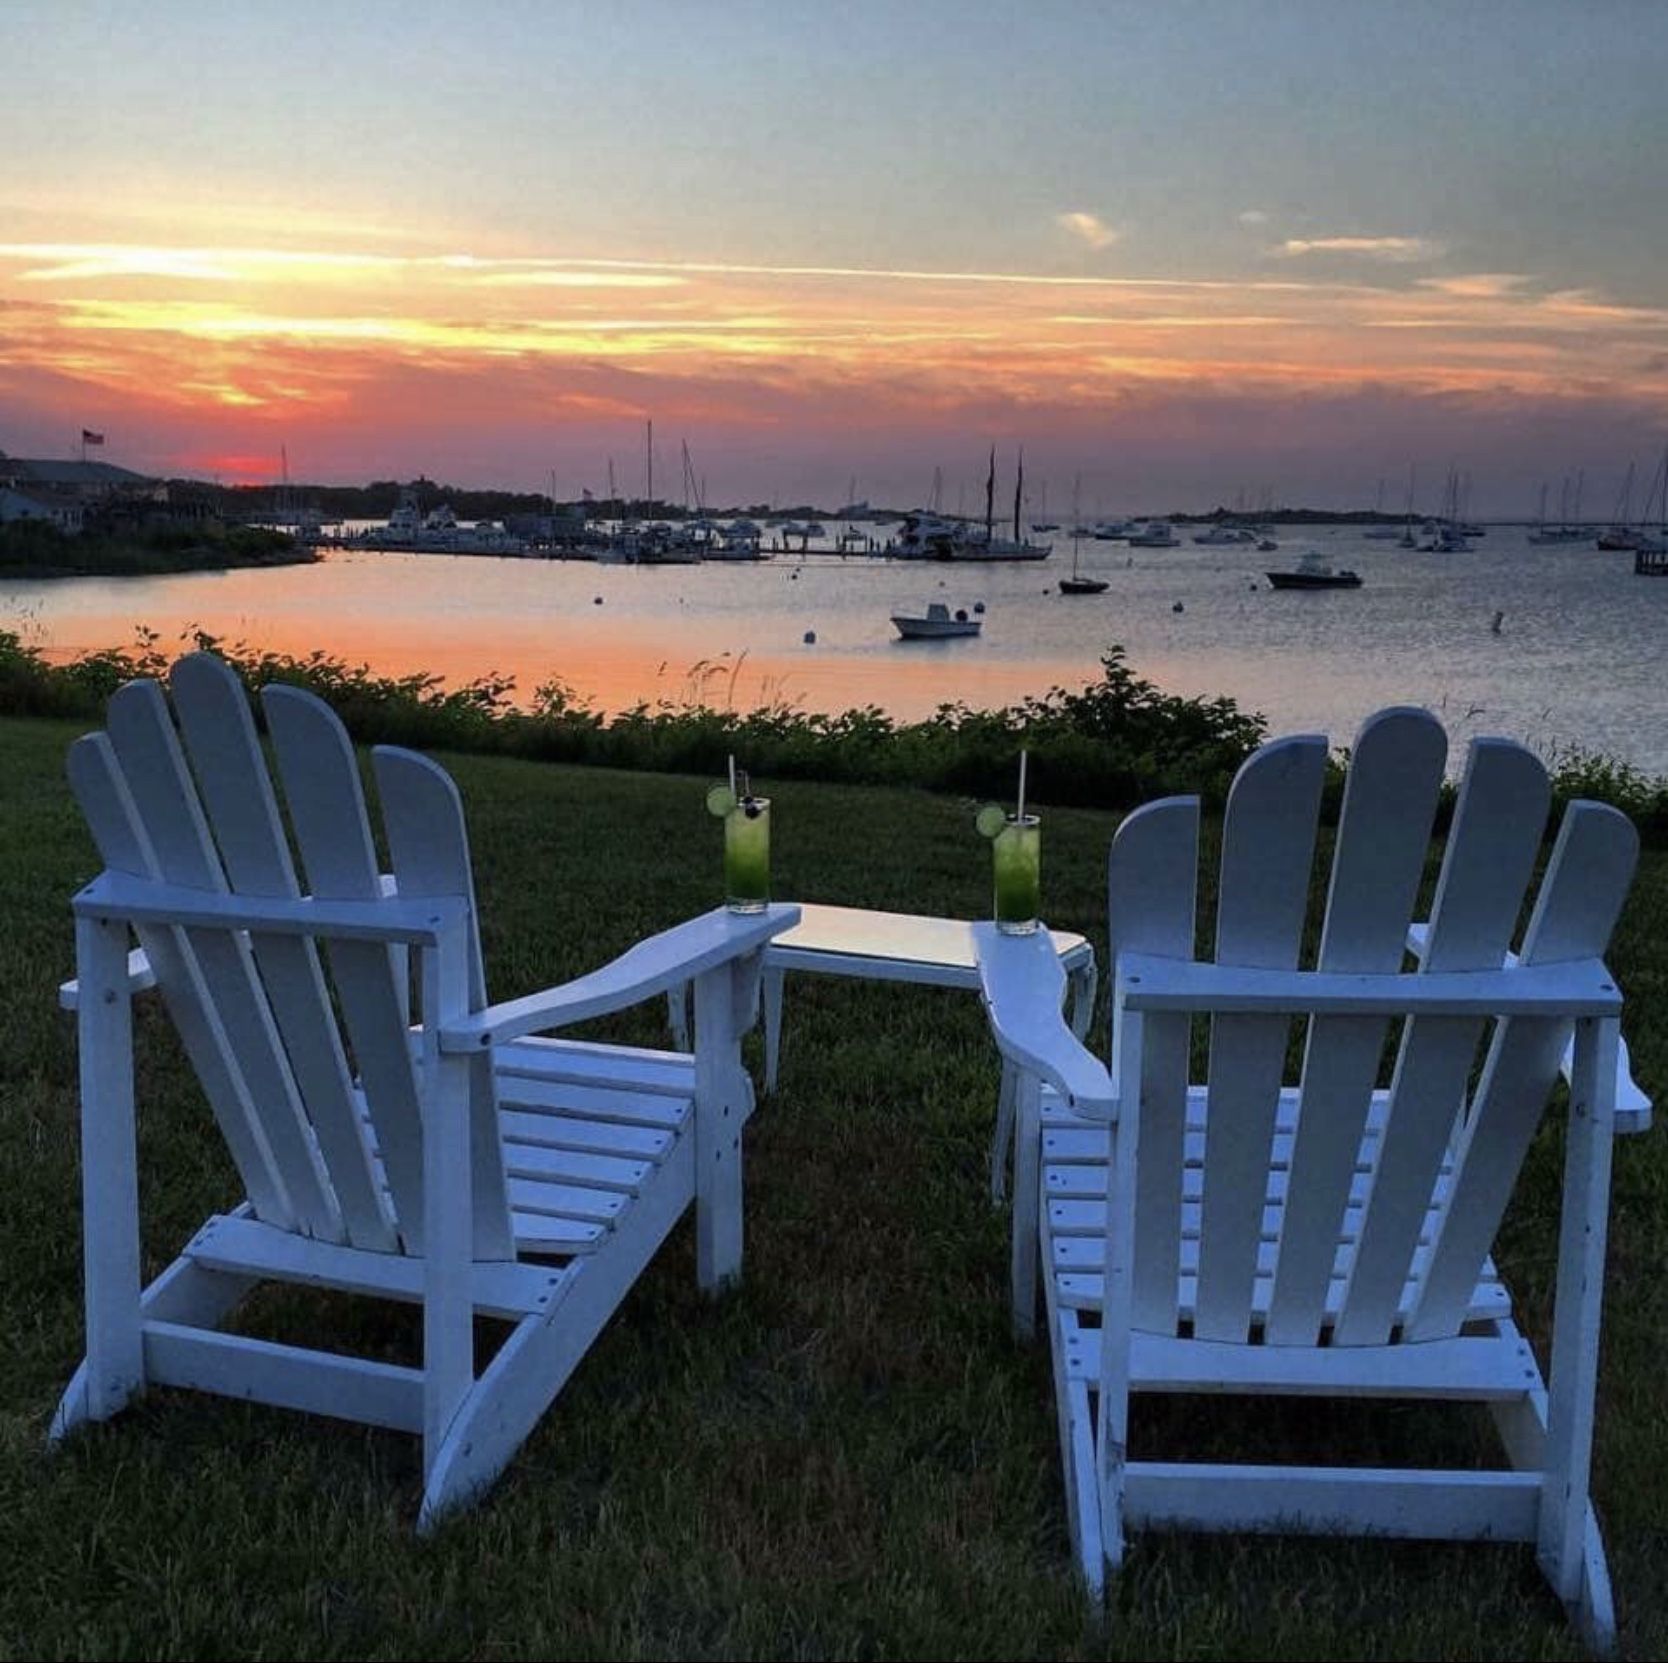 Looking to Buy Stackable Outdoor Chairs This Year. Here are 10 Things to Consider